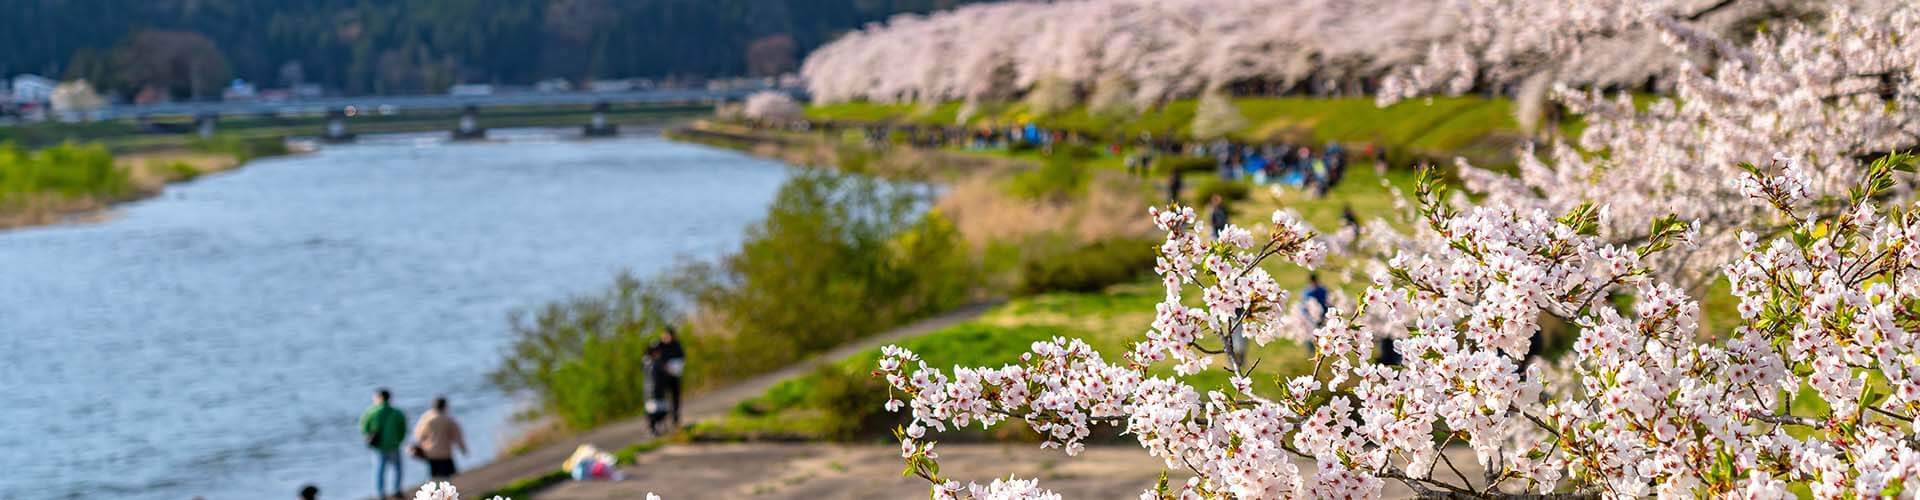 Cherry blossoms in full bloom along a riverside path with people enjoying the scenery.